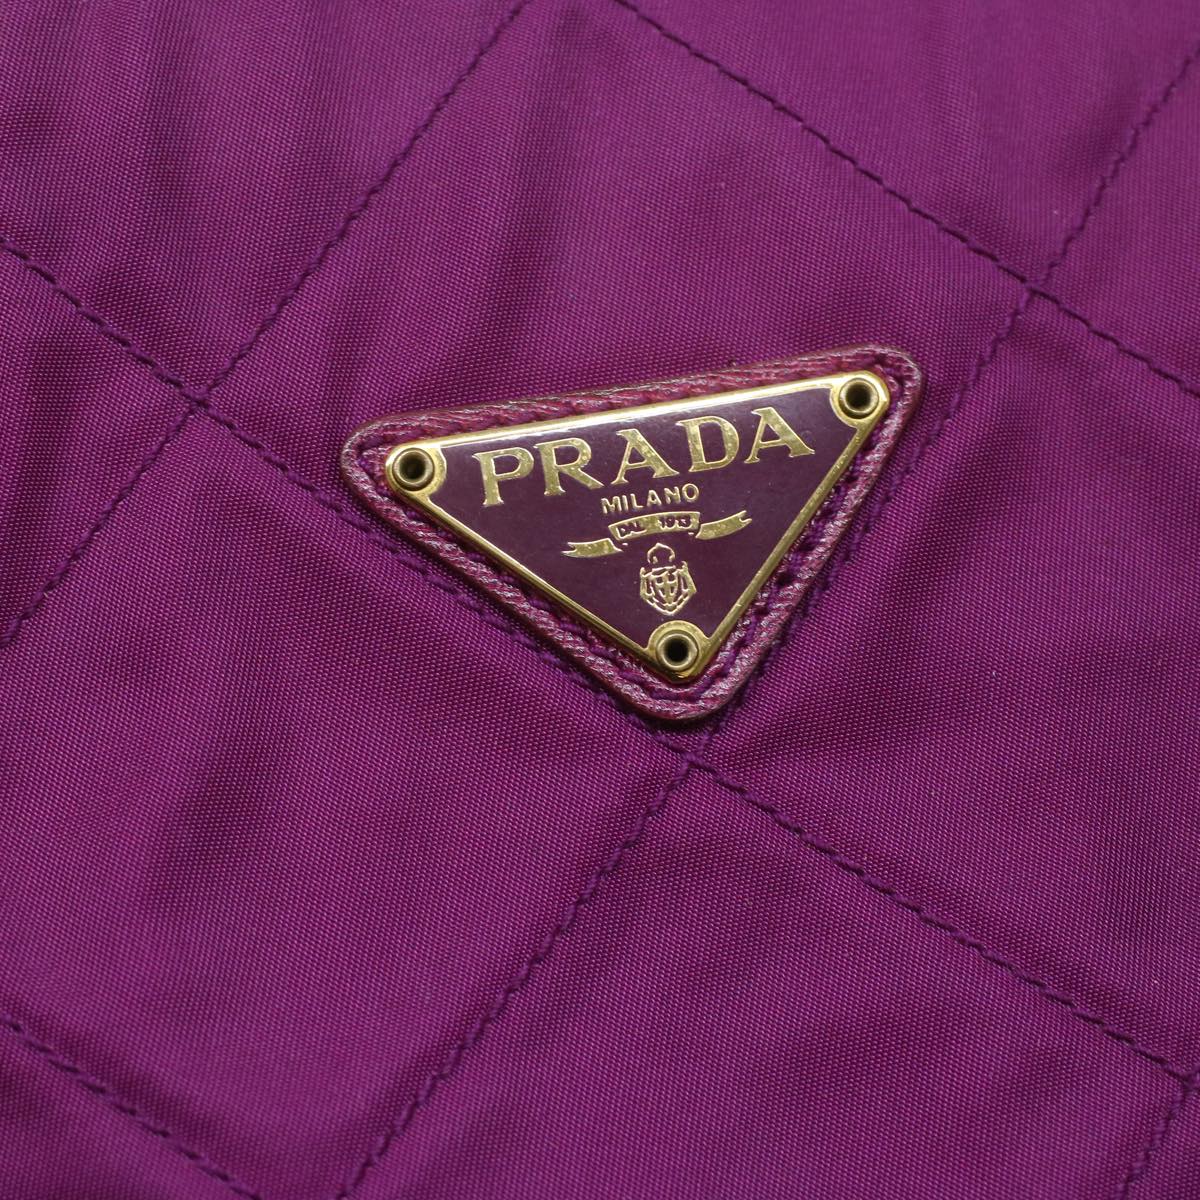 PRADA Quilted Chain Shoulder Bag Nylon Wine Red Auth 36132